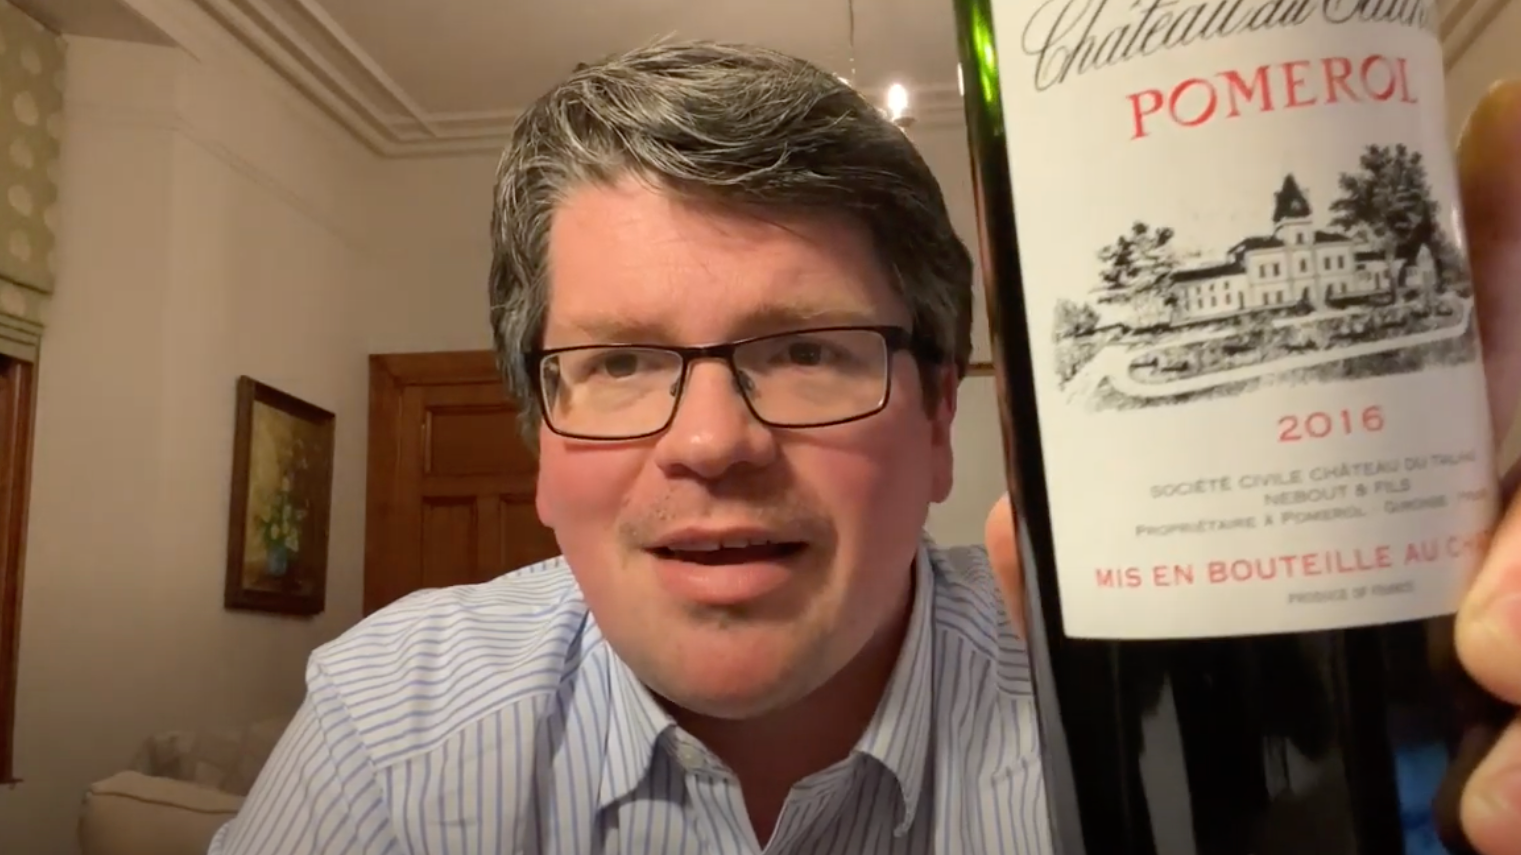 The Tasting Note #12 A Pomerol Present